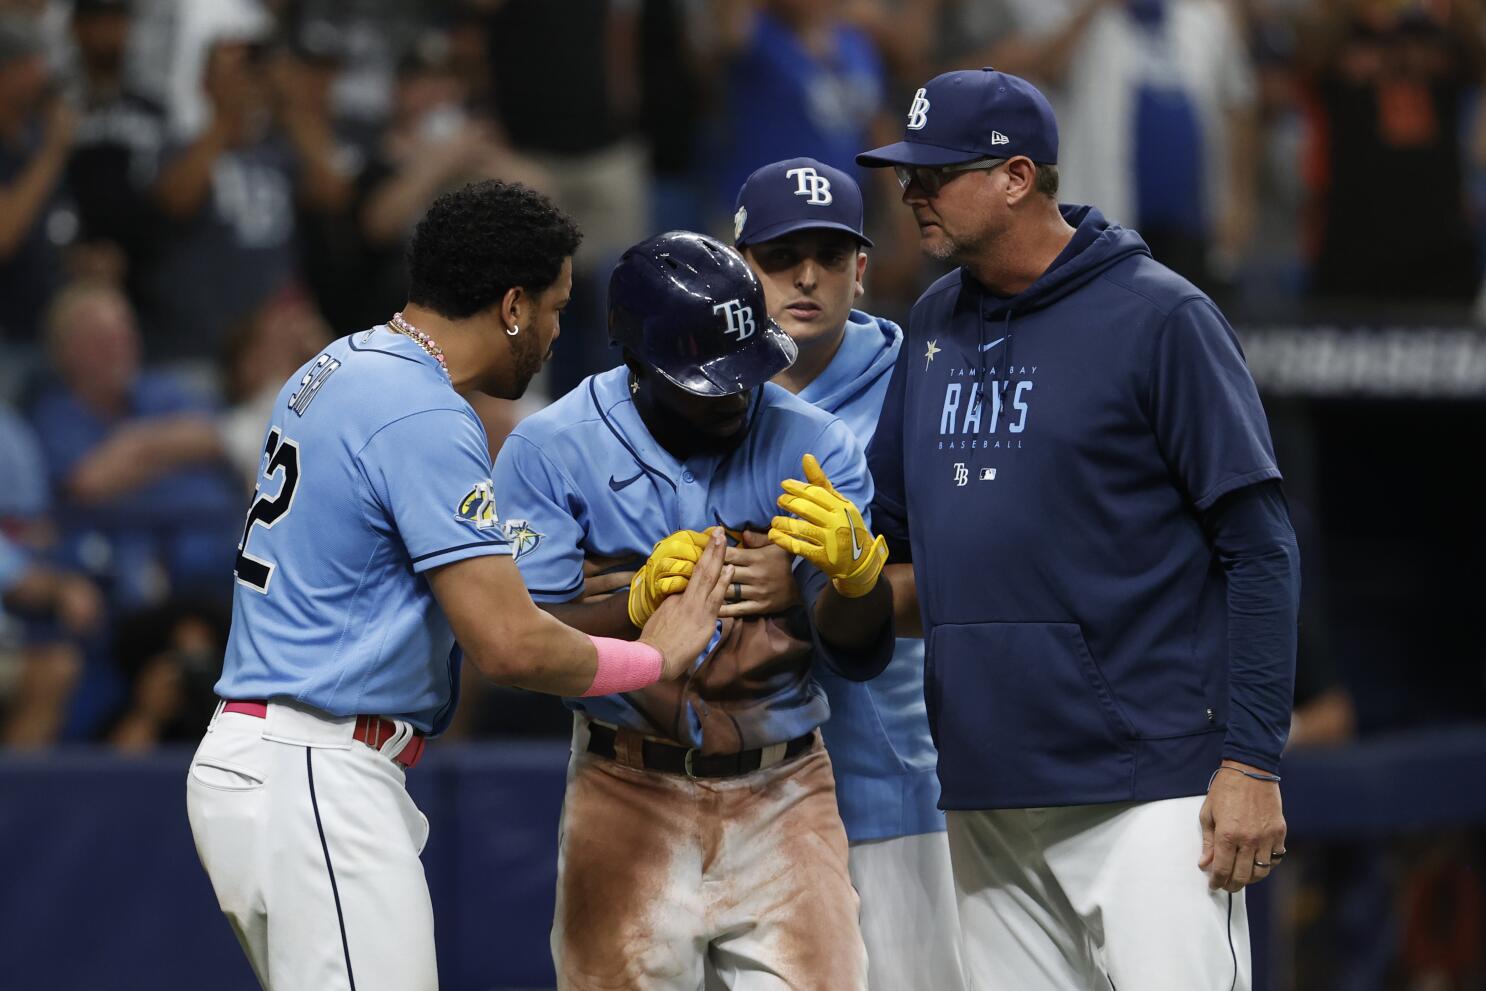 Rays improve to 30-9 after beating Yankees 8-2 behind Josh Lowe's 5 RBIs -  The San Diego Union-Tribune